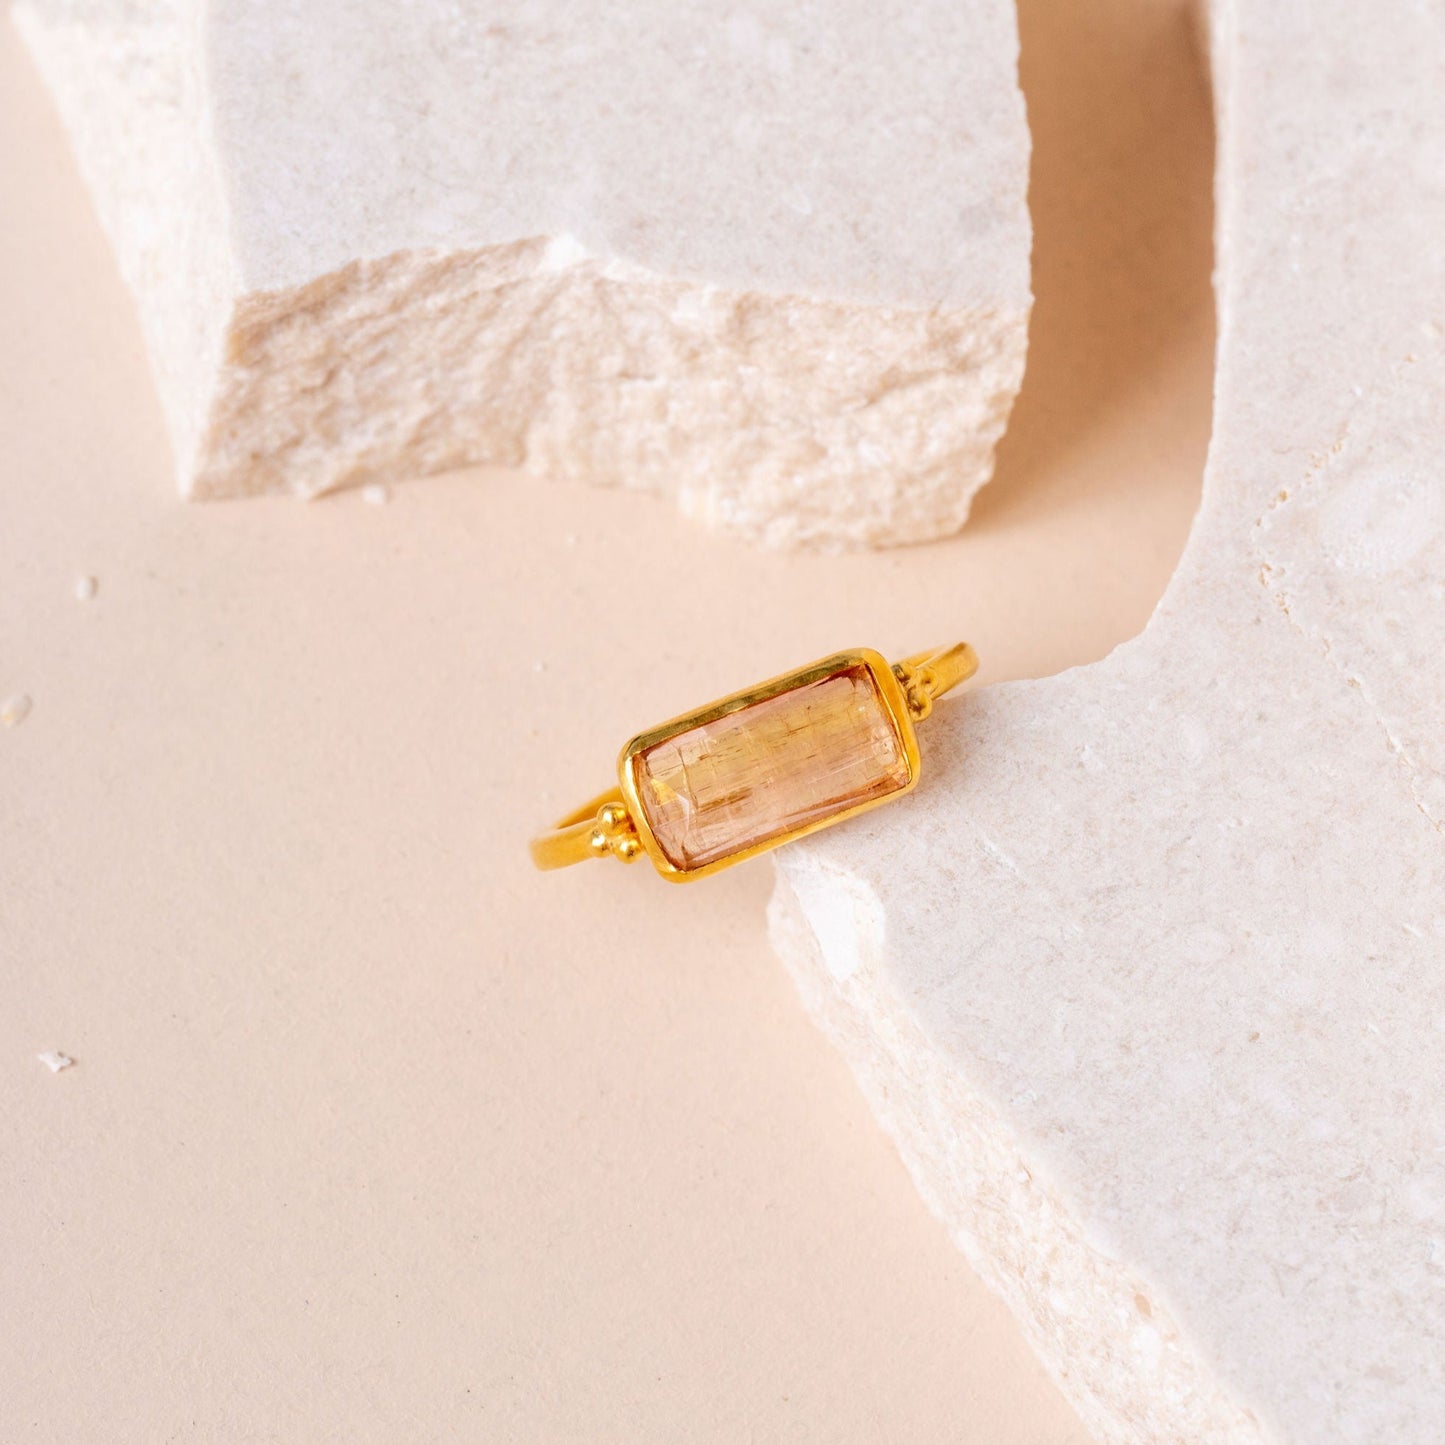 Handmade gold ring adorned with a one-of-a-kind light yellow tourmaline.